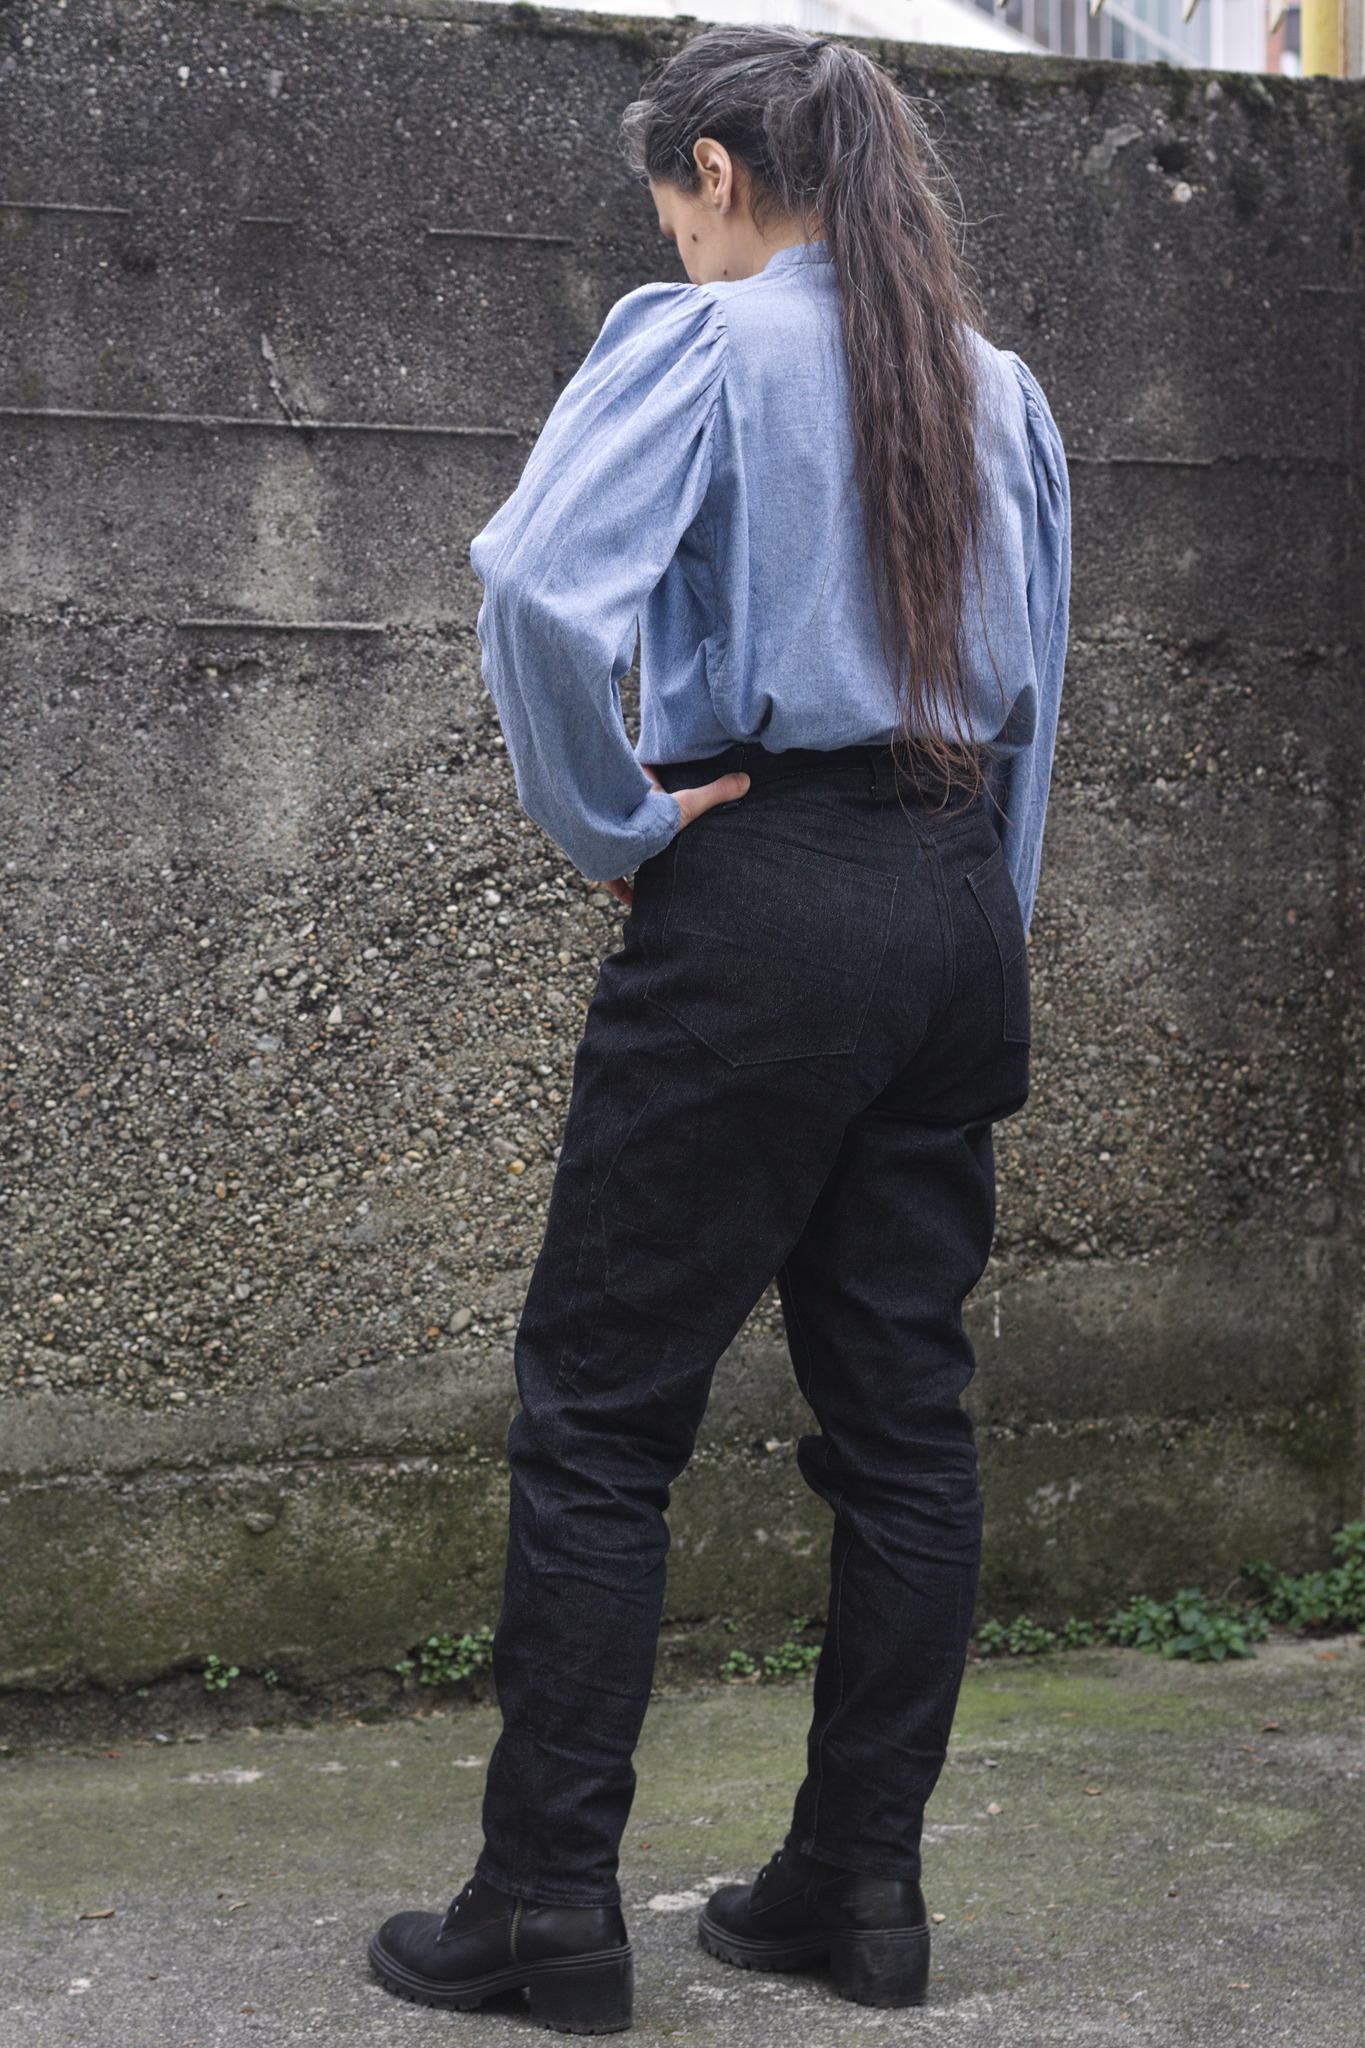 A woman wearing another pair of jeans; the waistband here is shaped to fit rather than having elastic.